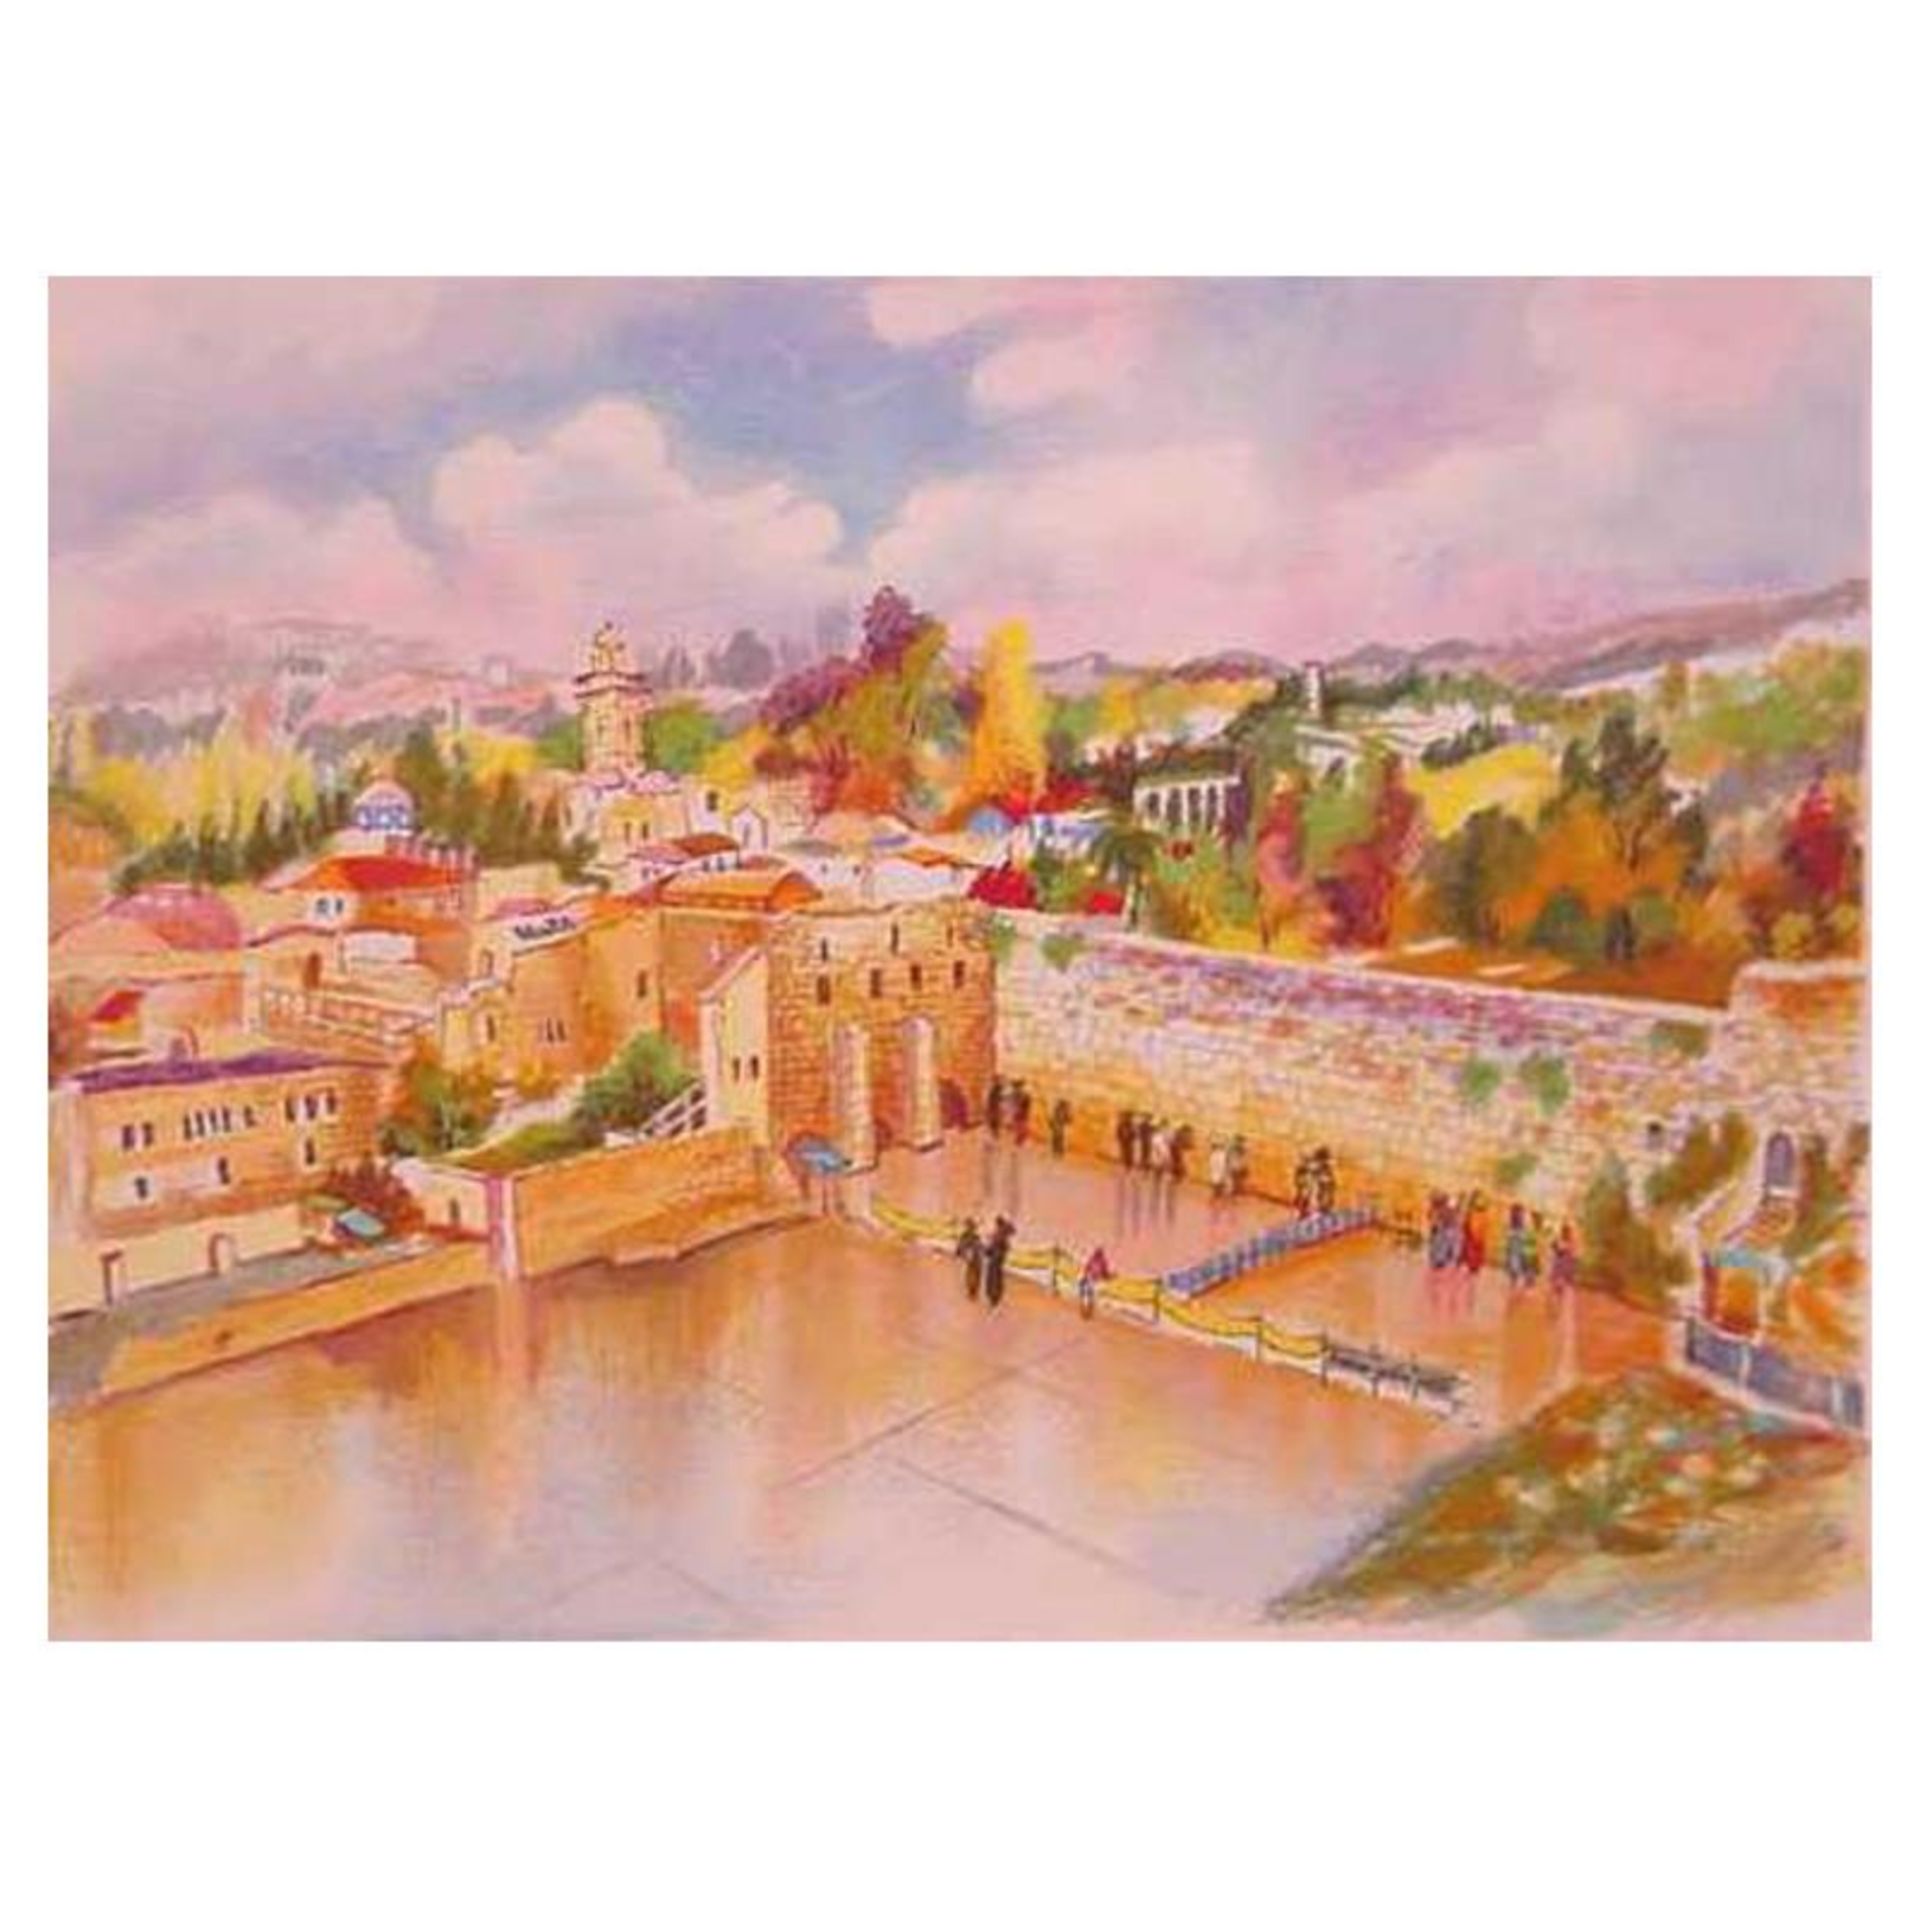 Zina Roitman, "Jerusalem" Hand Signed Limited Edition Serigraph with Letter of A